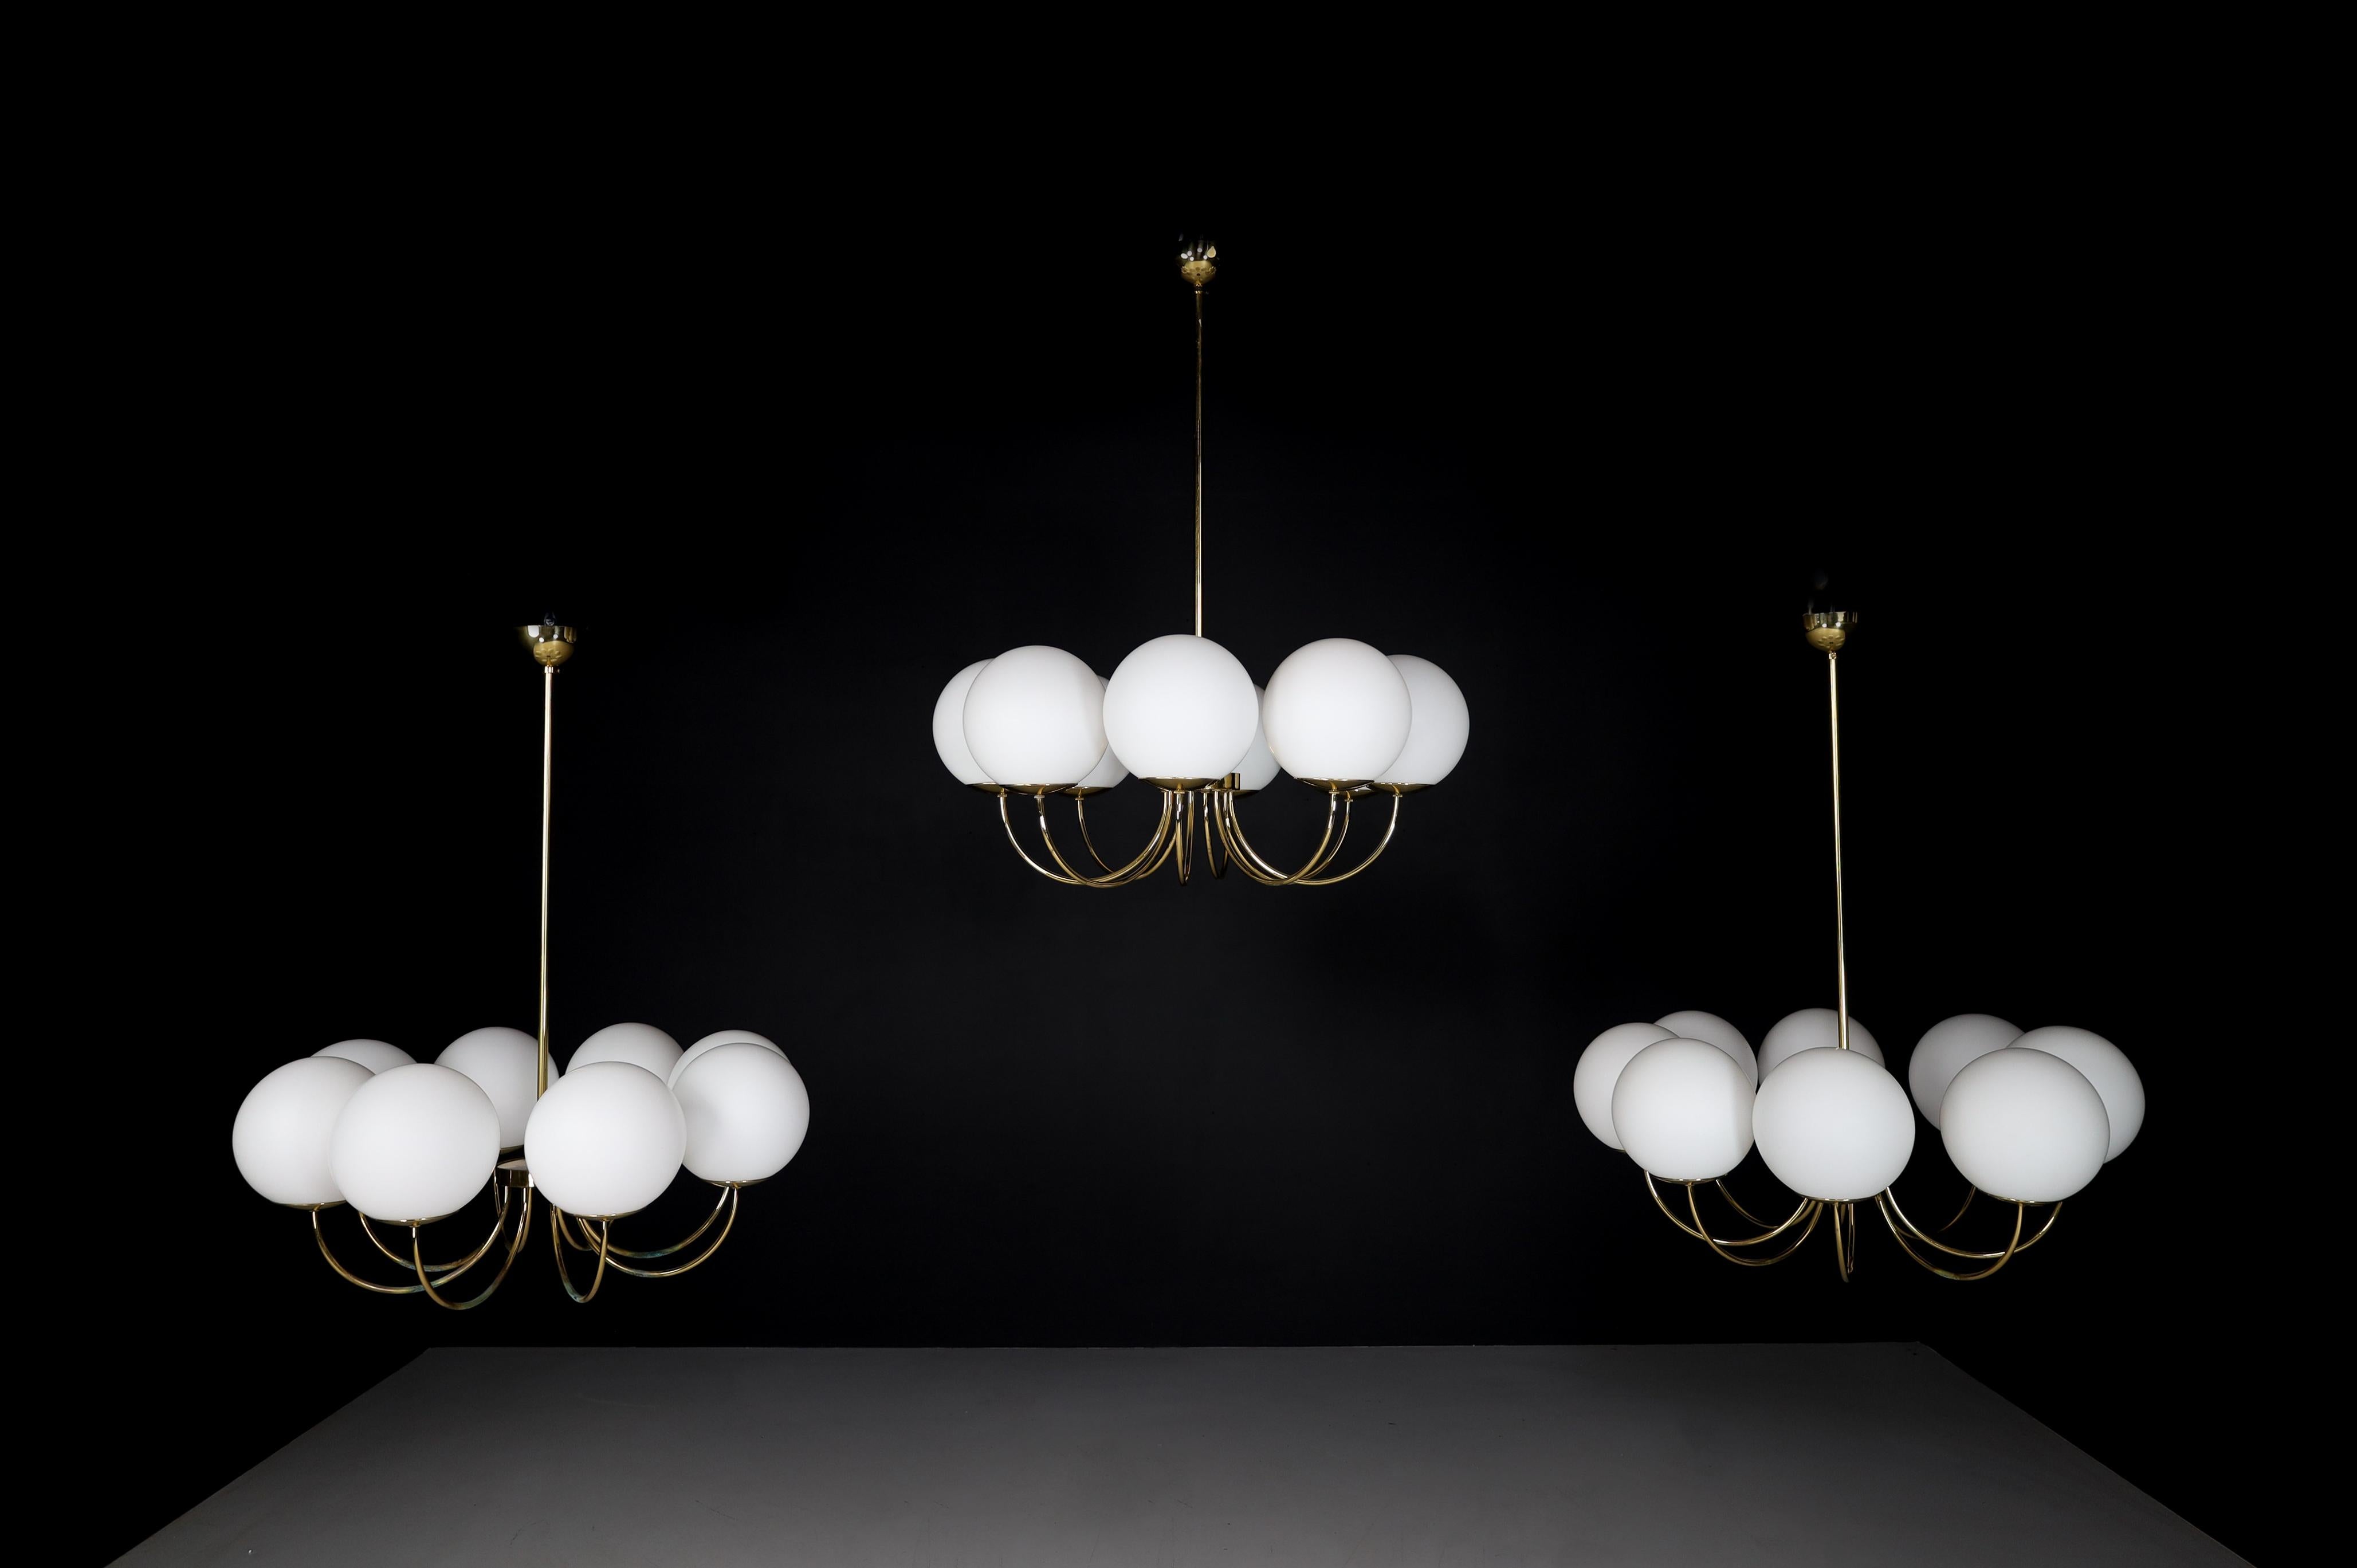 1 of 3 Elegant Chandeliers with Brass Fixture and Opaline Glass Globes, 1960s For Sale 1